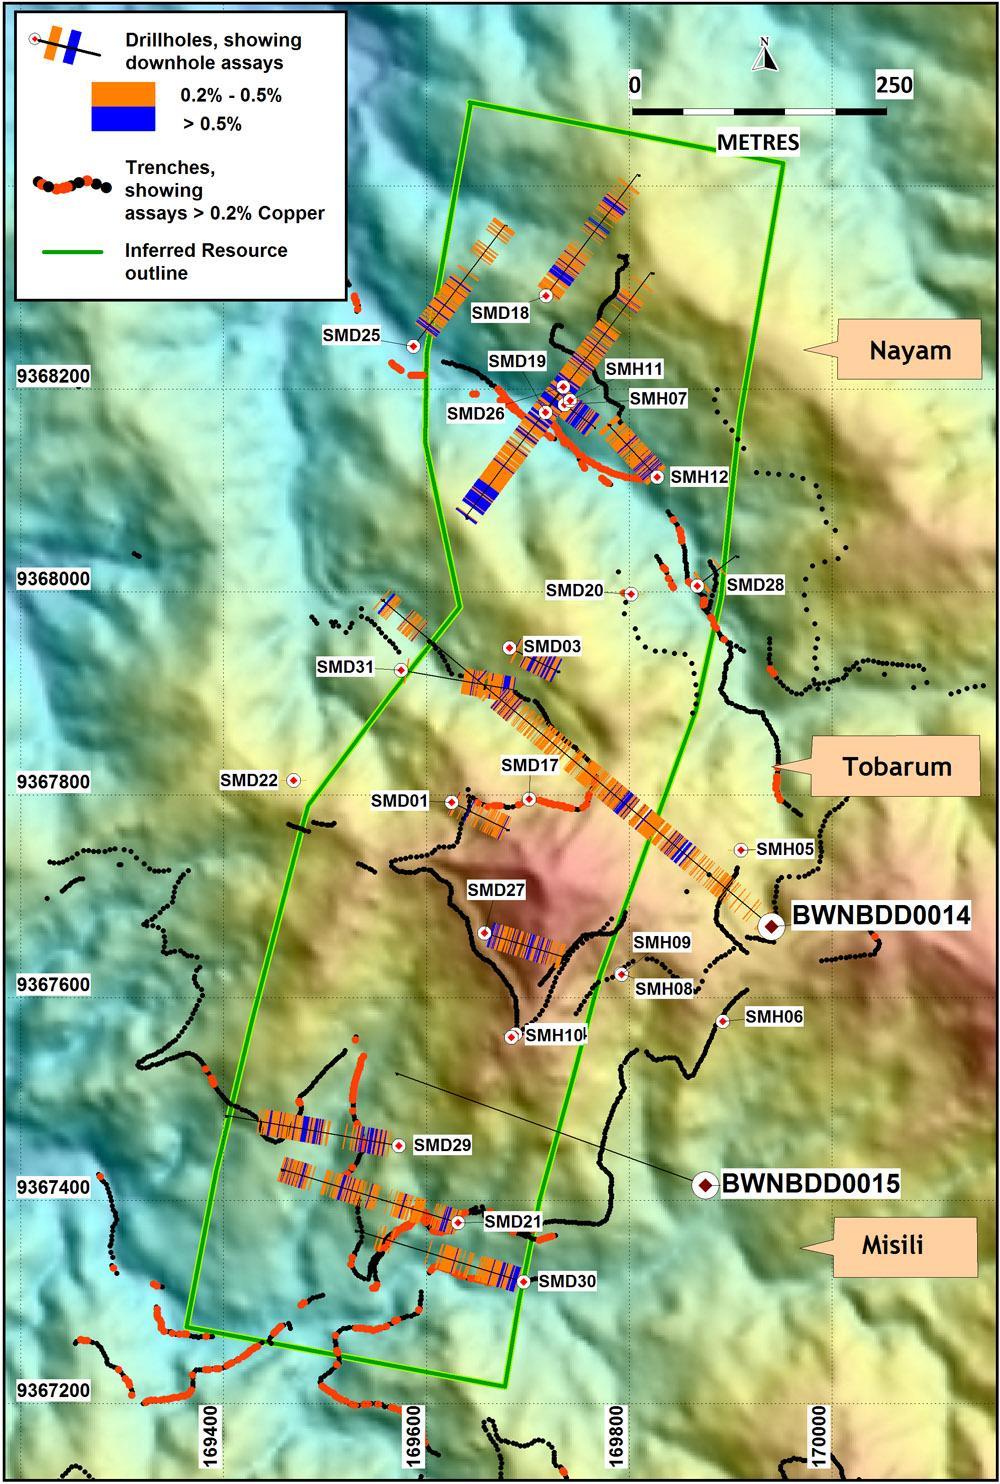 FIGURE 2: Topography Image Showing the Drilling